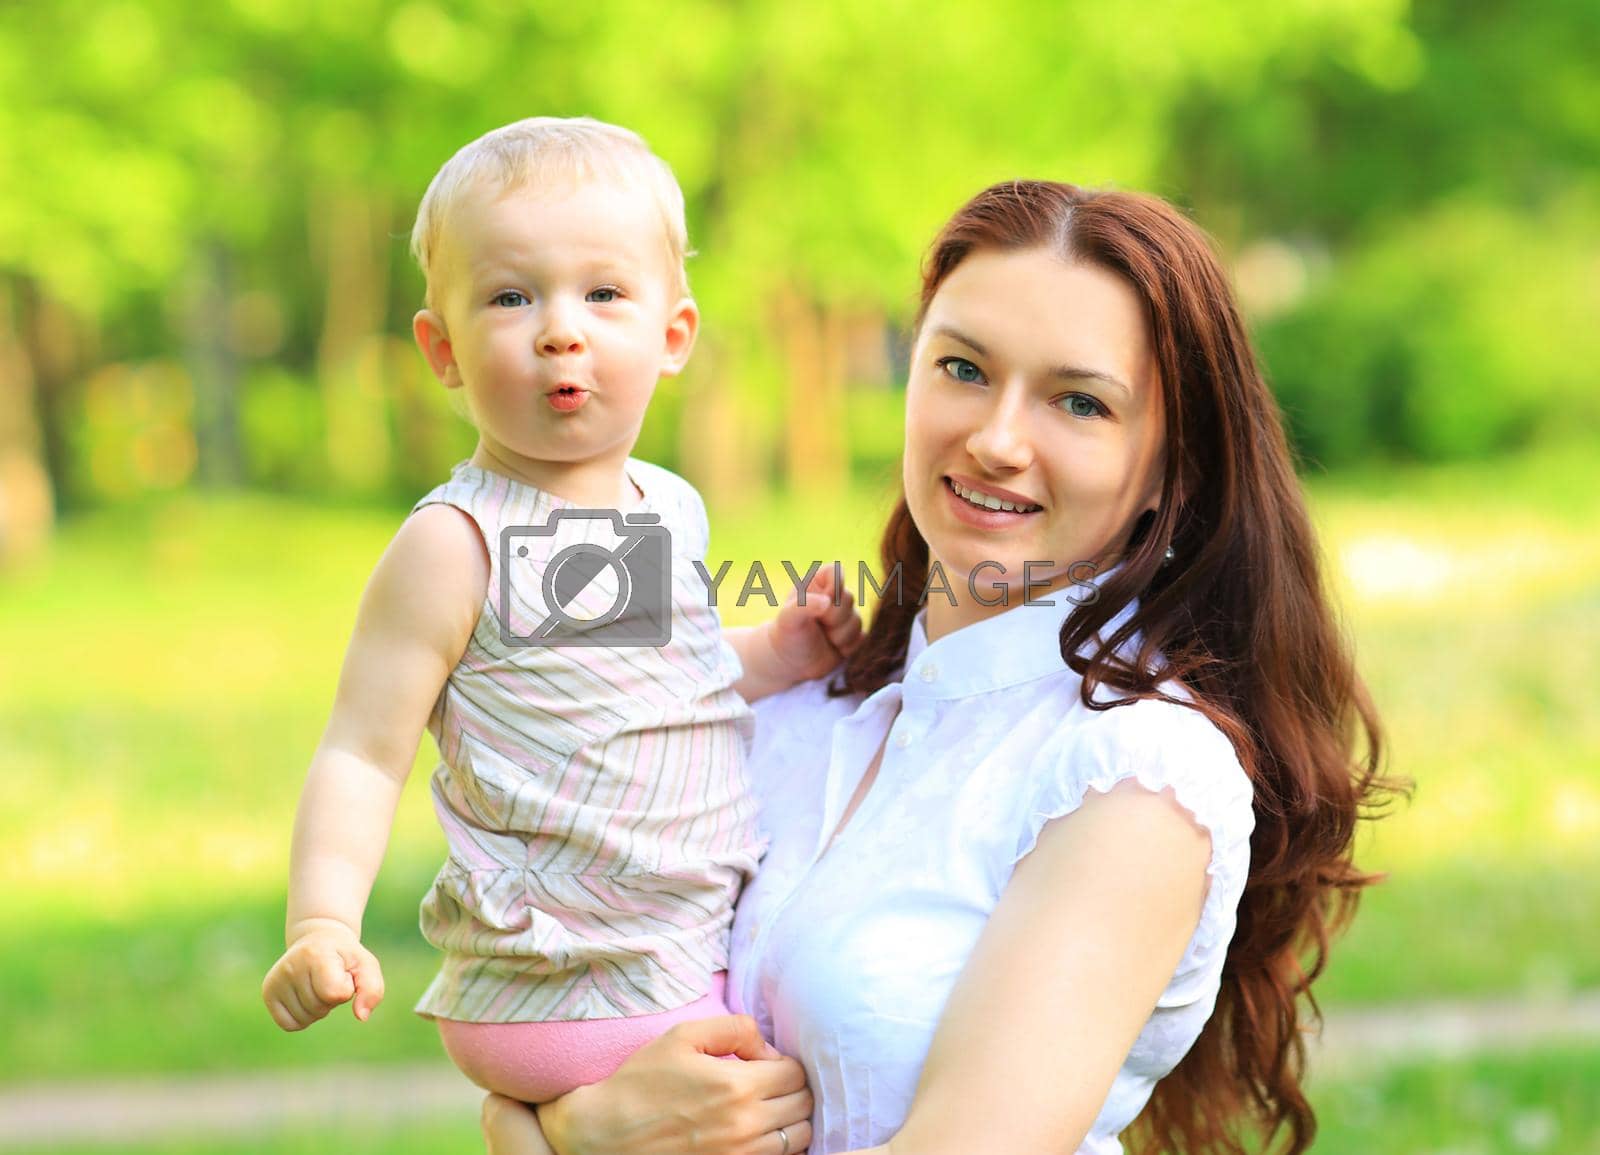 Royalty free image of Happy mother and daughter laughing together outdoors by SmartPhotoLab